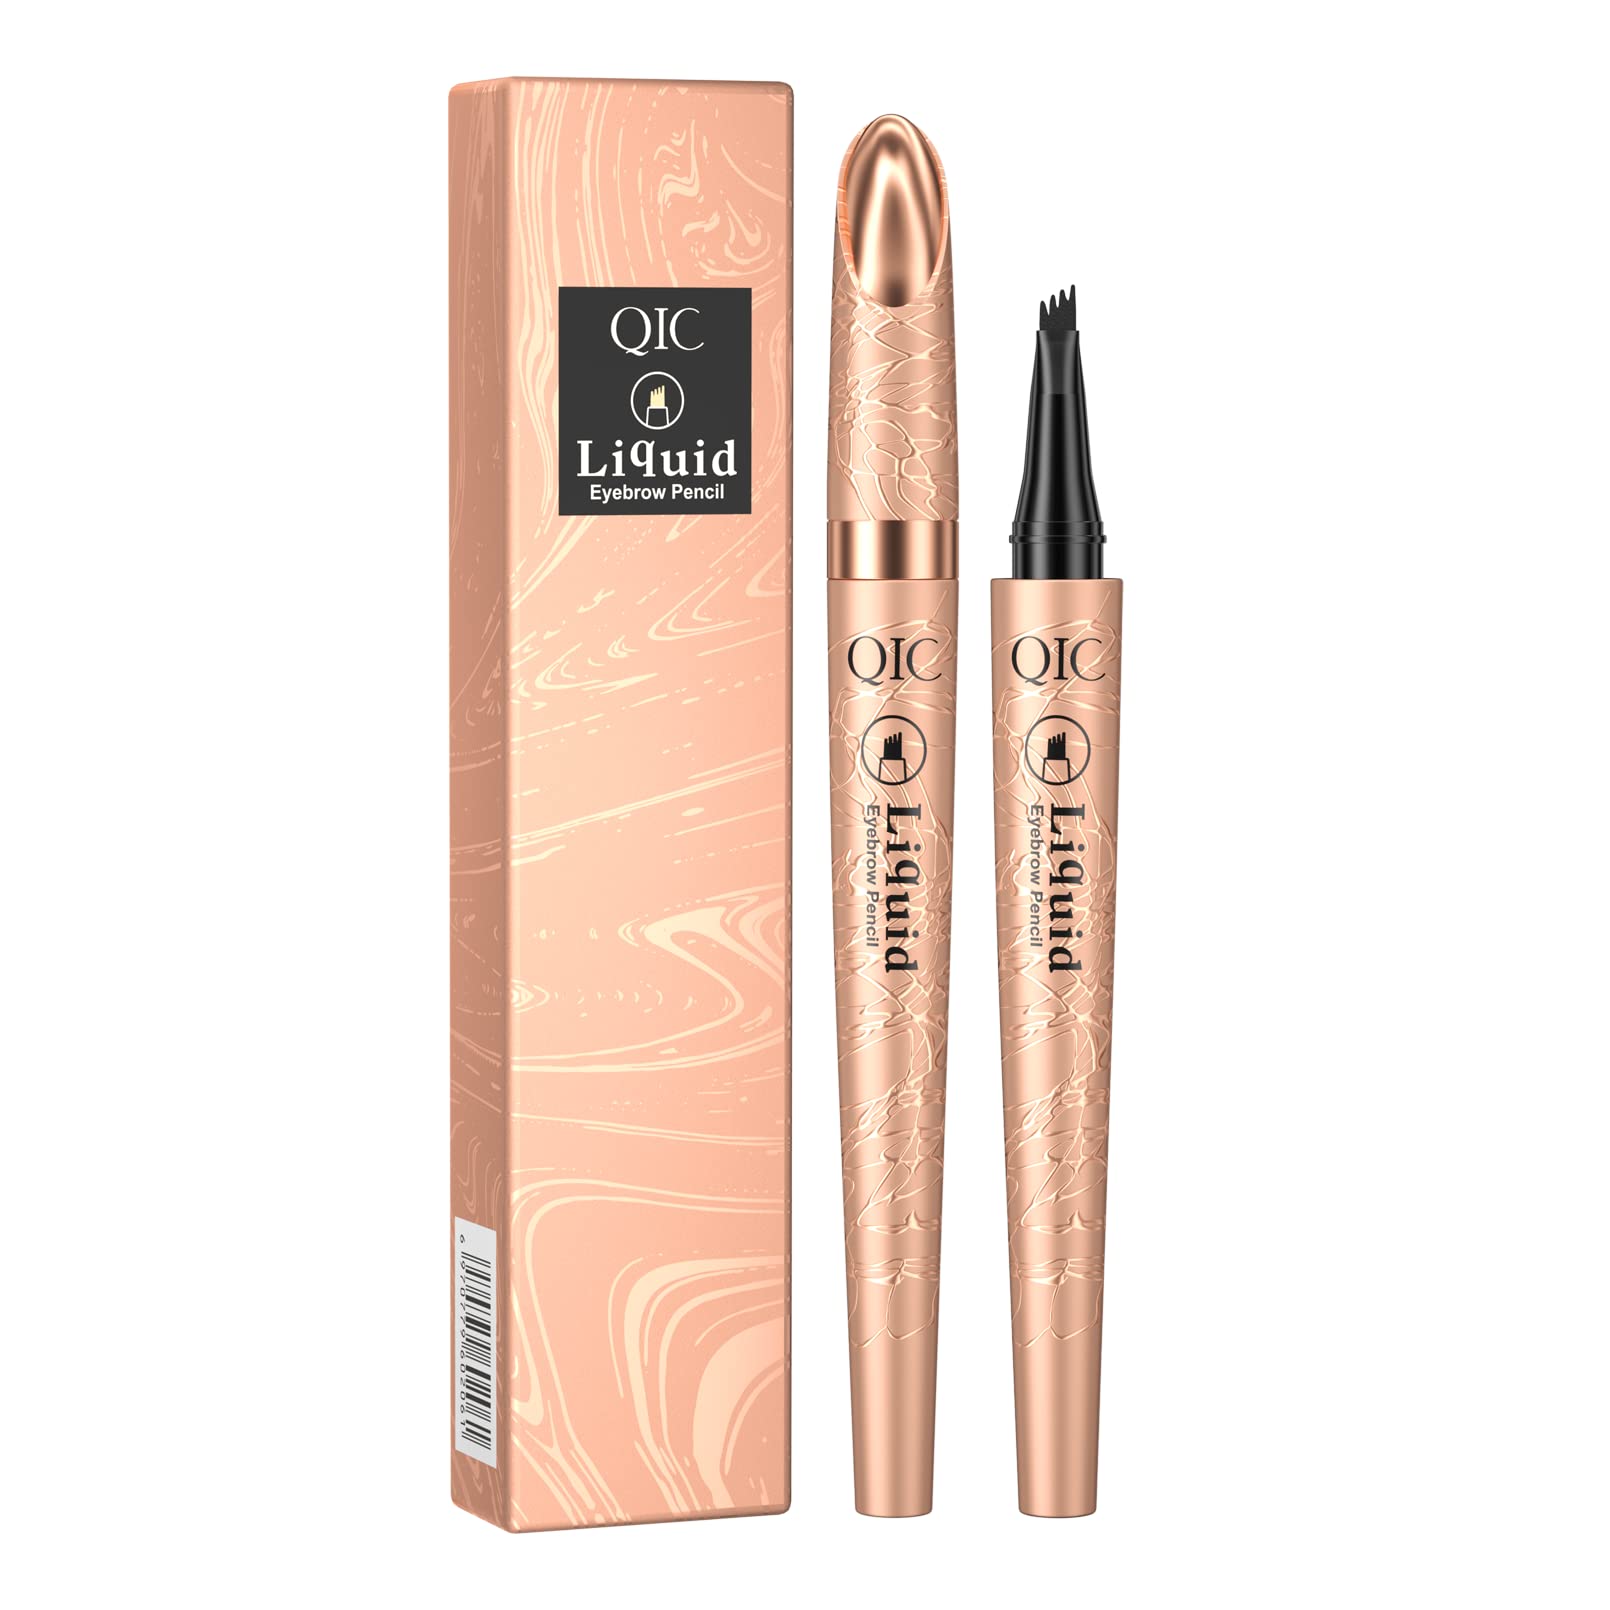 ObiPosay Waterproof Dark Brown Eyebrow Microblading Pen - Four Point Brow Pen for Natural-Looking Eyebrows, Long-Lasting and Smudge-Proof.(Dark Brown/02)